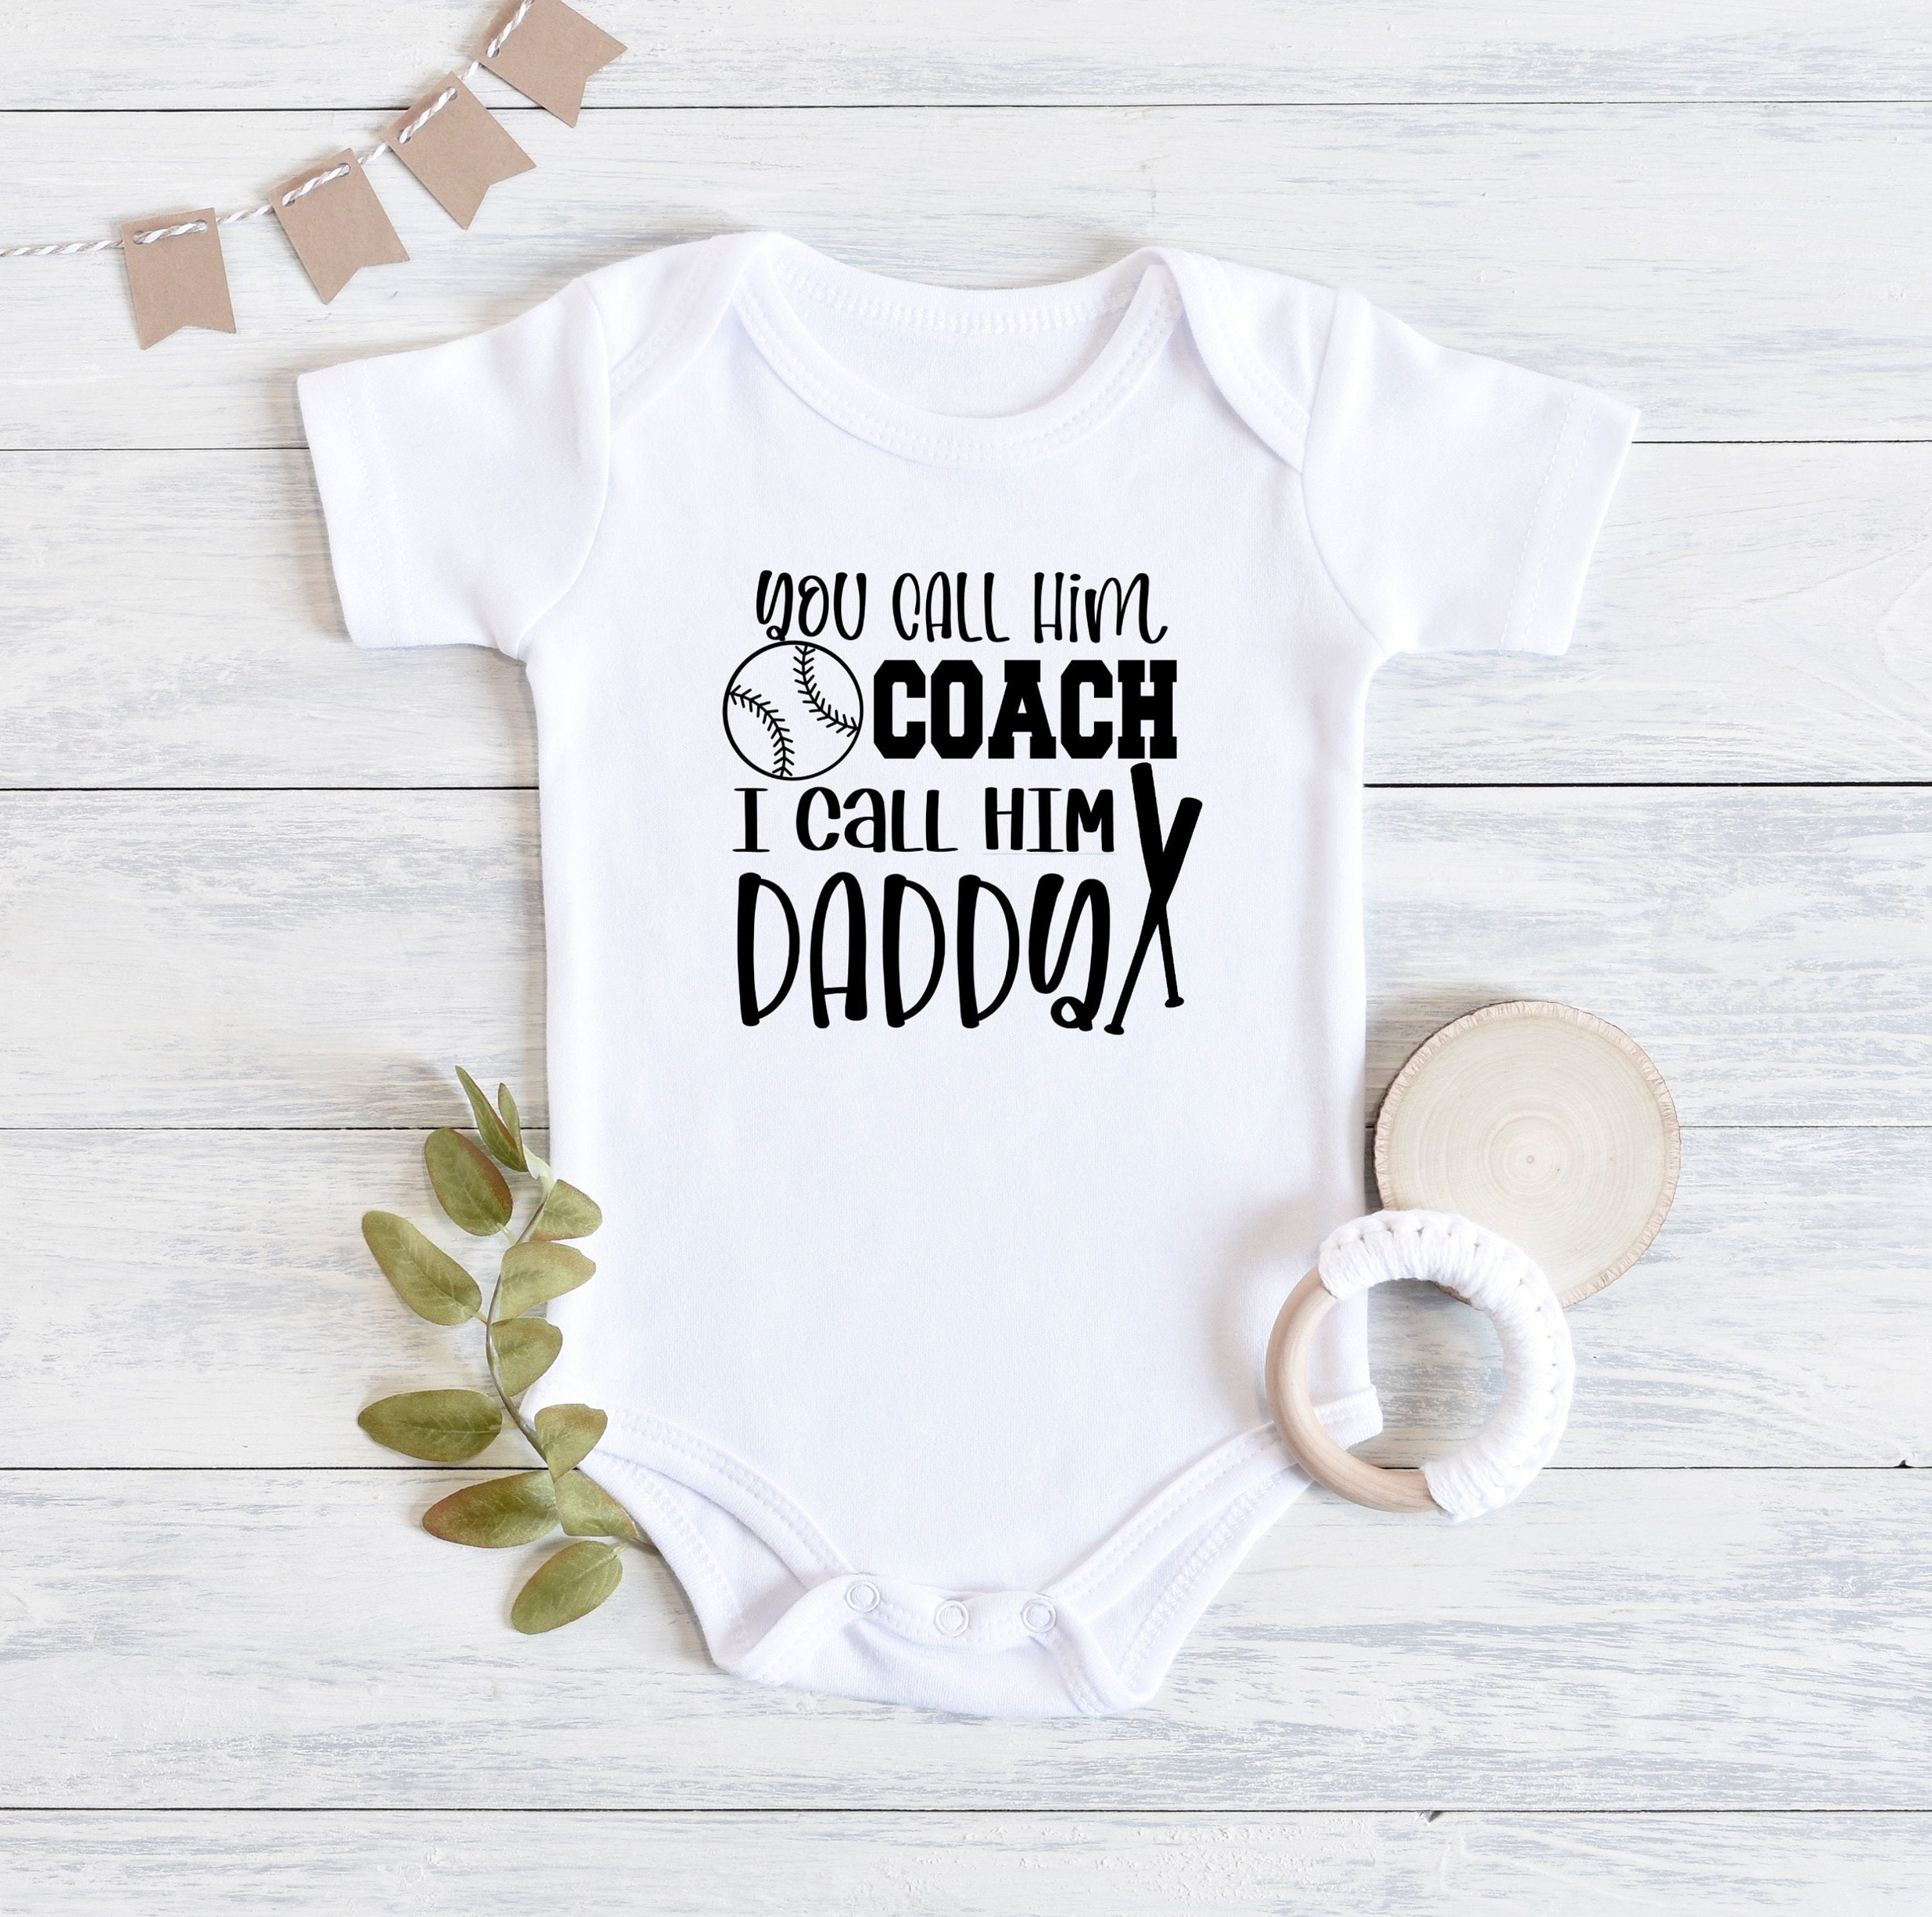 Baseball Baby Bodysuit, Baby Shower Gift for Baseball Coach, Baby Announcement for Coach's Kid, Game Day Outfit, Daddy's Assistant Coach